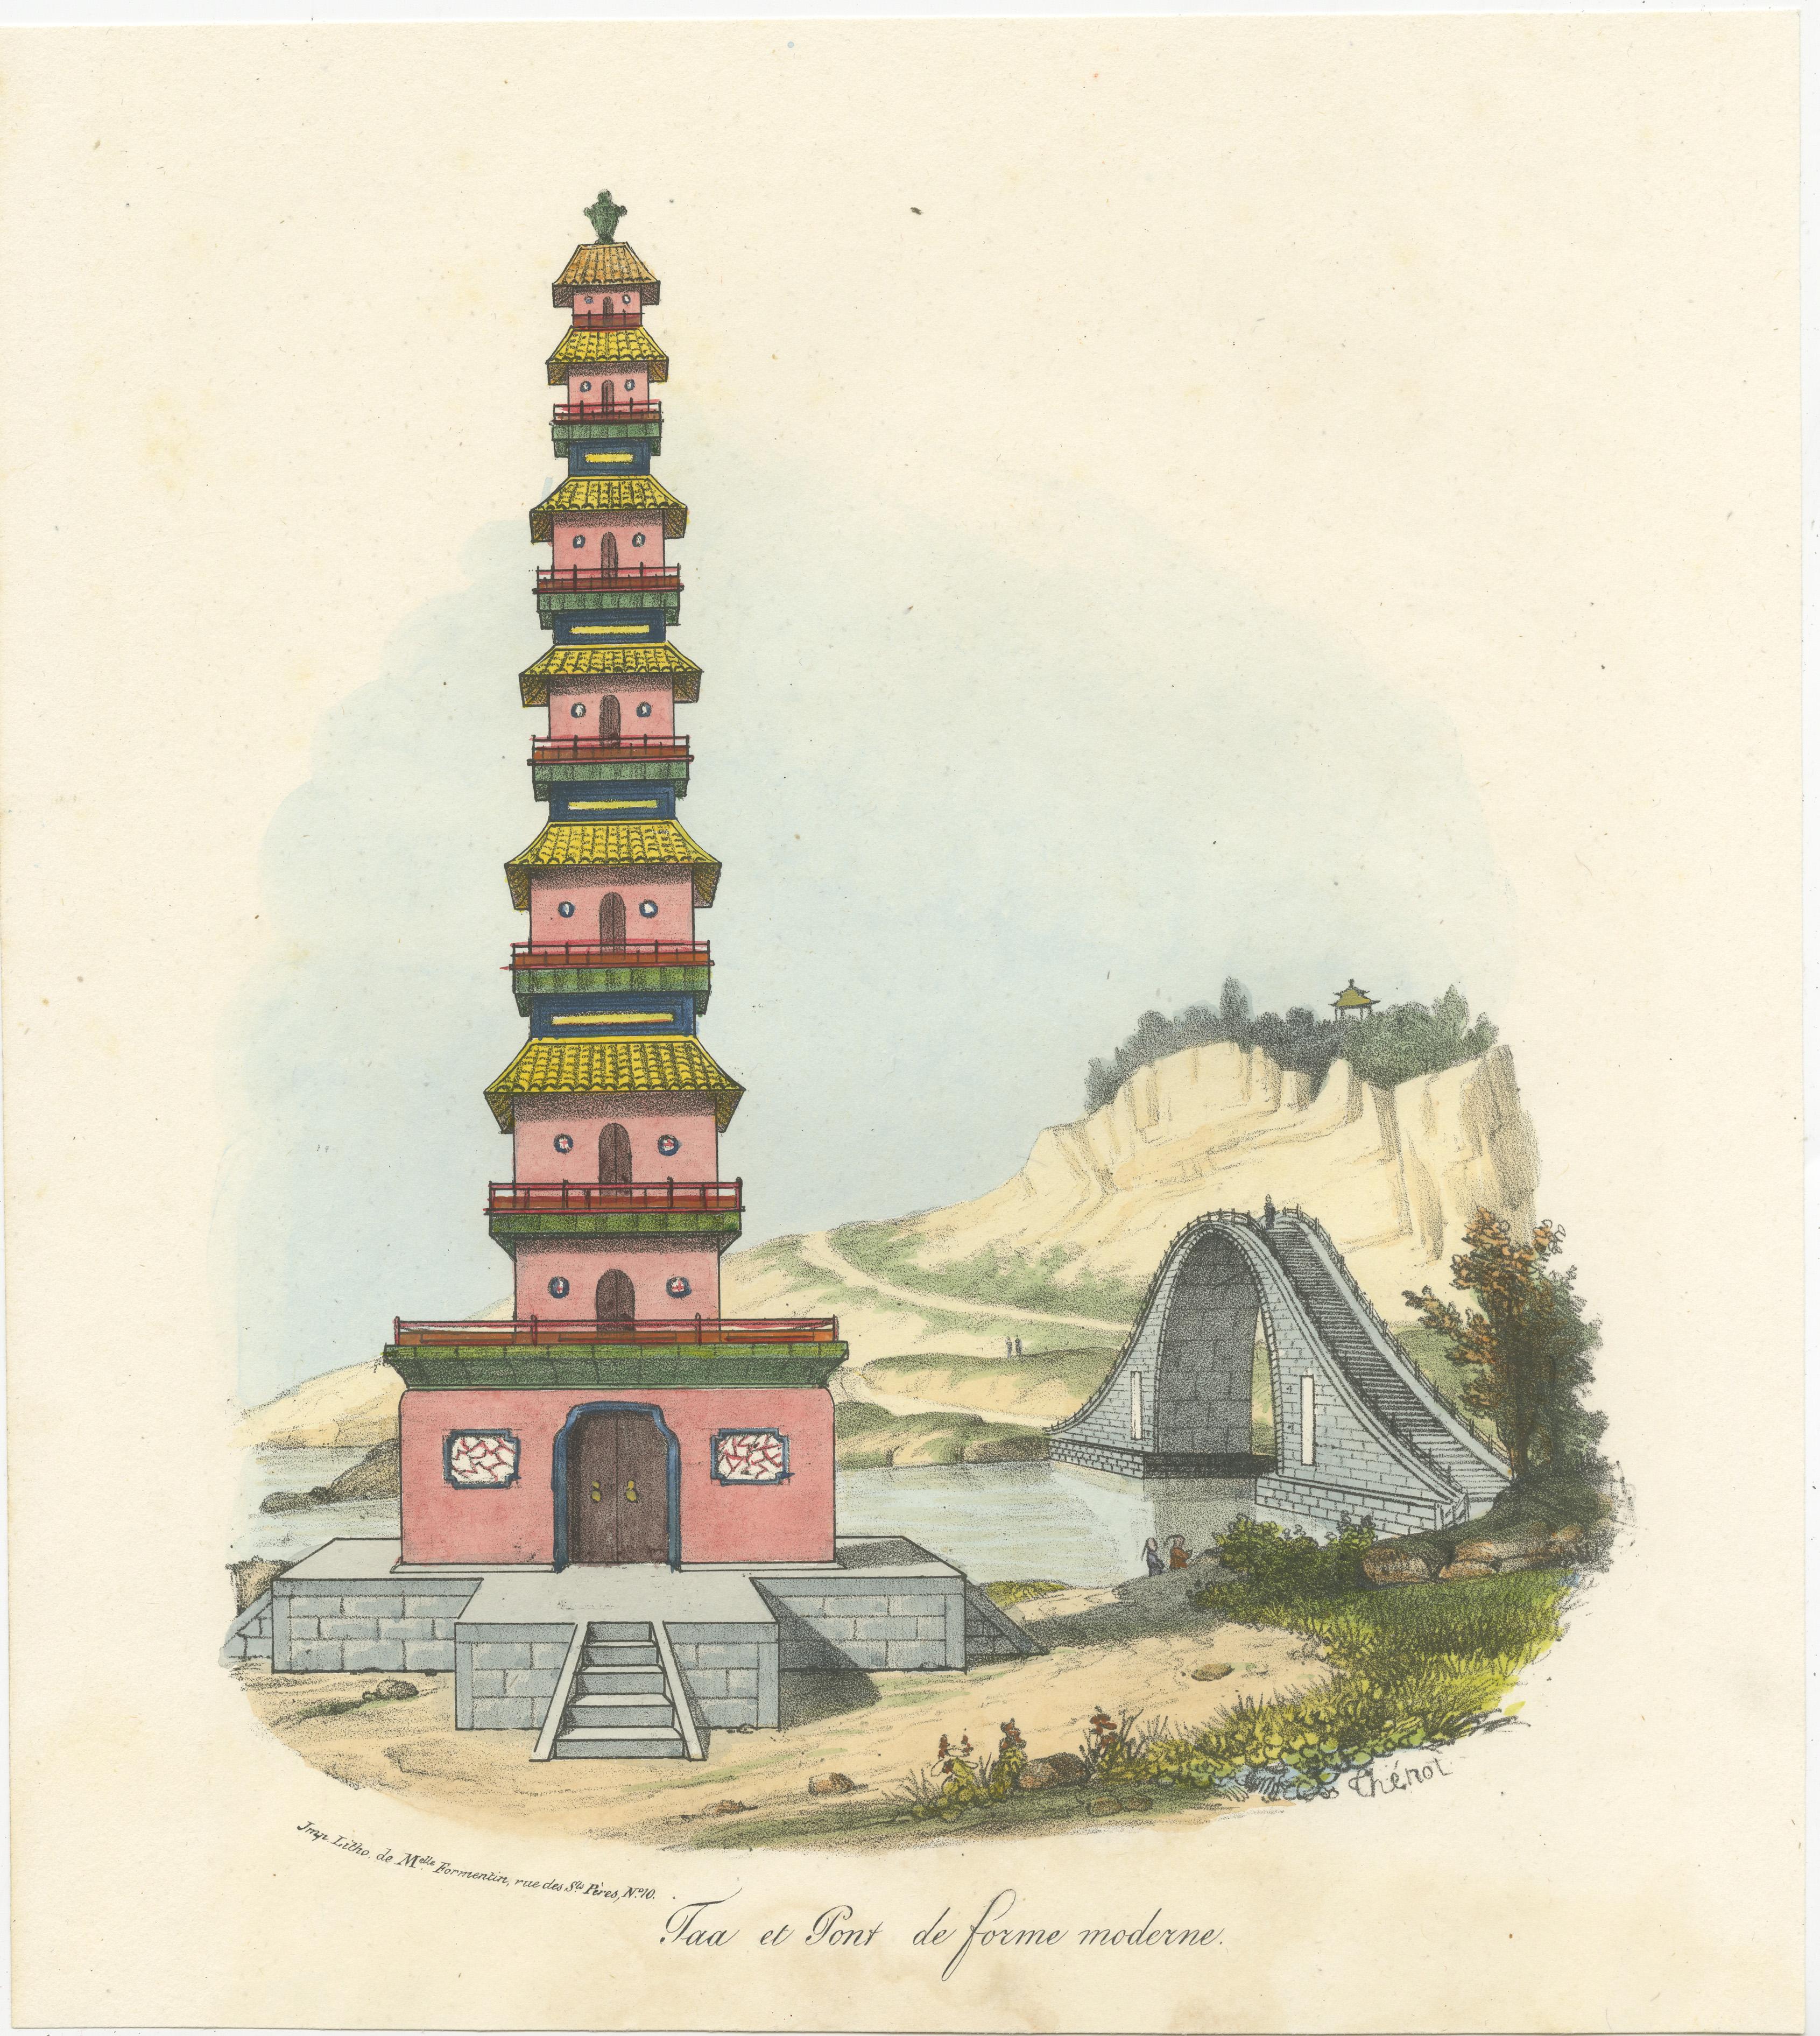 Antique print titled 'Taa et Pont de forme moderne'. Original old print of a Chinese taa and bridge. A taa is a kind of pagoda. This print originates from 'La Chine, moeurs, usages, costumes, arts et métiers, peines civiles et militaires, cérémonies